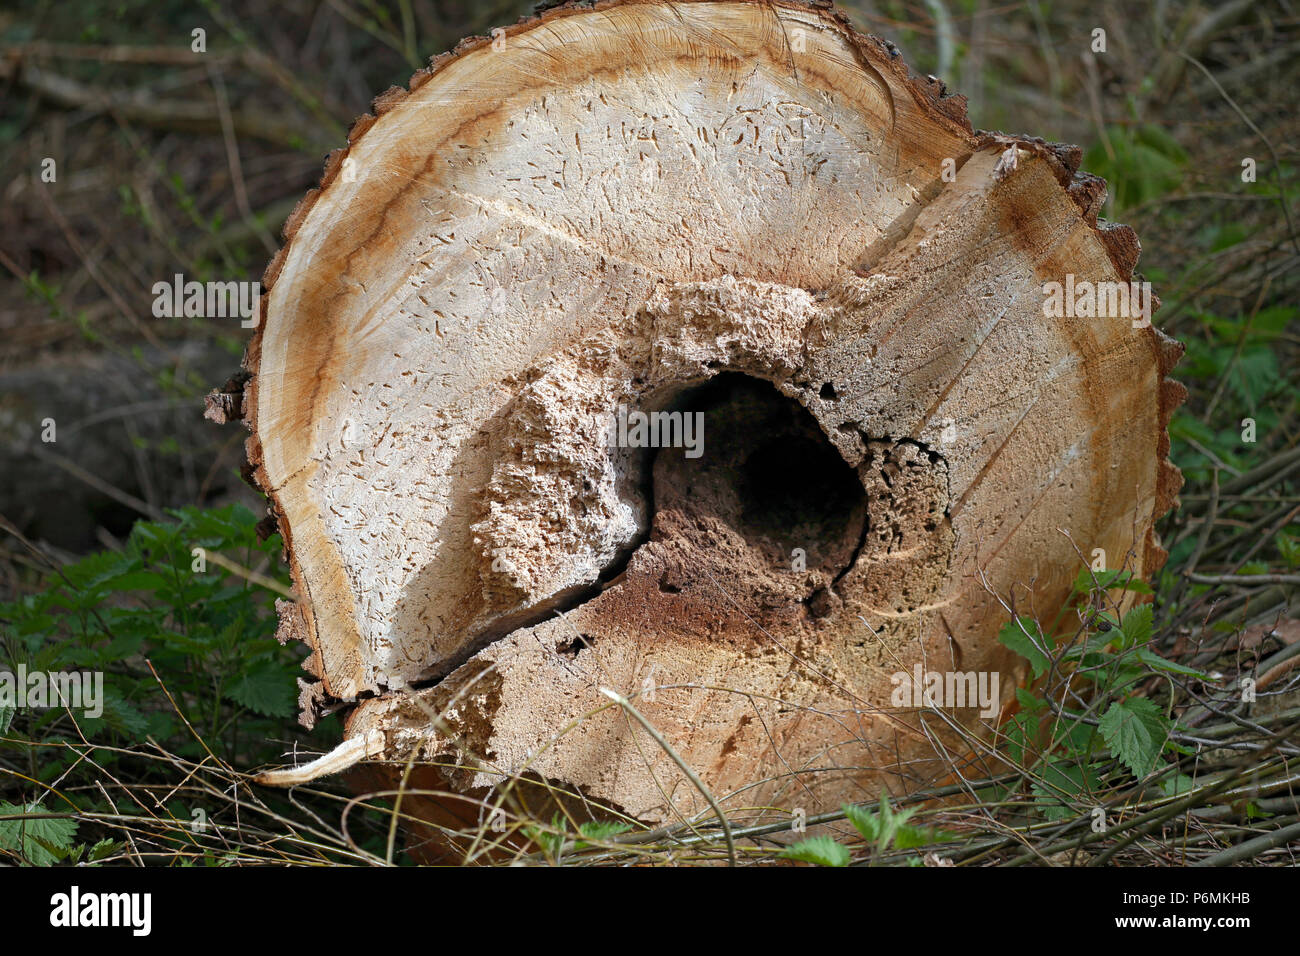 Hoppegarten, Germany - tree trunk with woodworm infestation Stock Photo